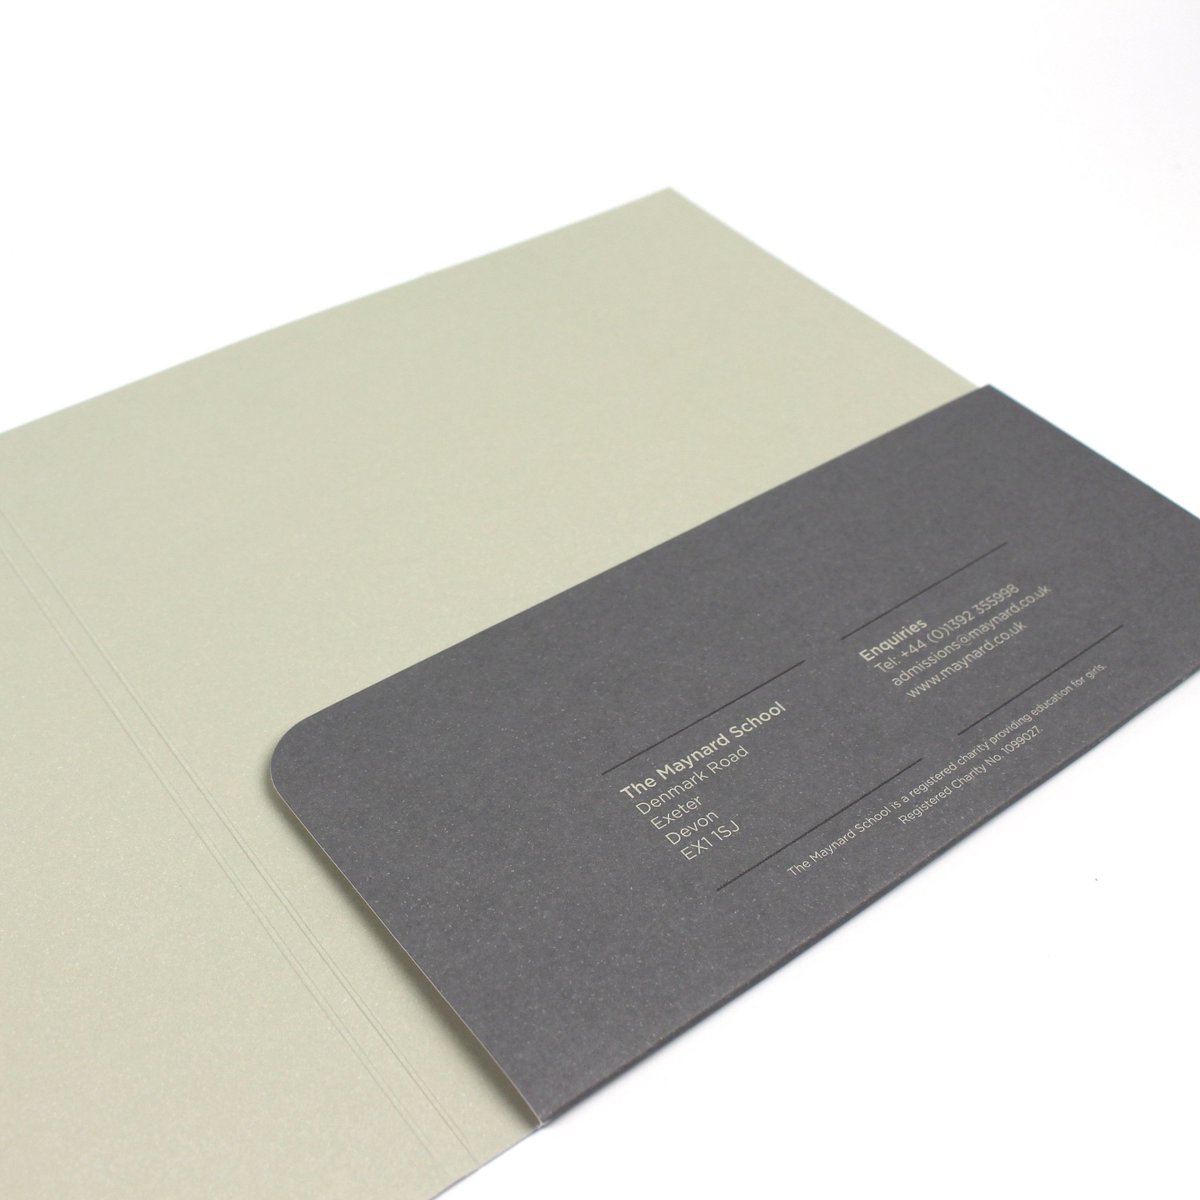 Combining silver foiling and embossing is the perfect way to create print materials with an added touch of luxury. This litho-printed folder shows off the power of combining these techniques!